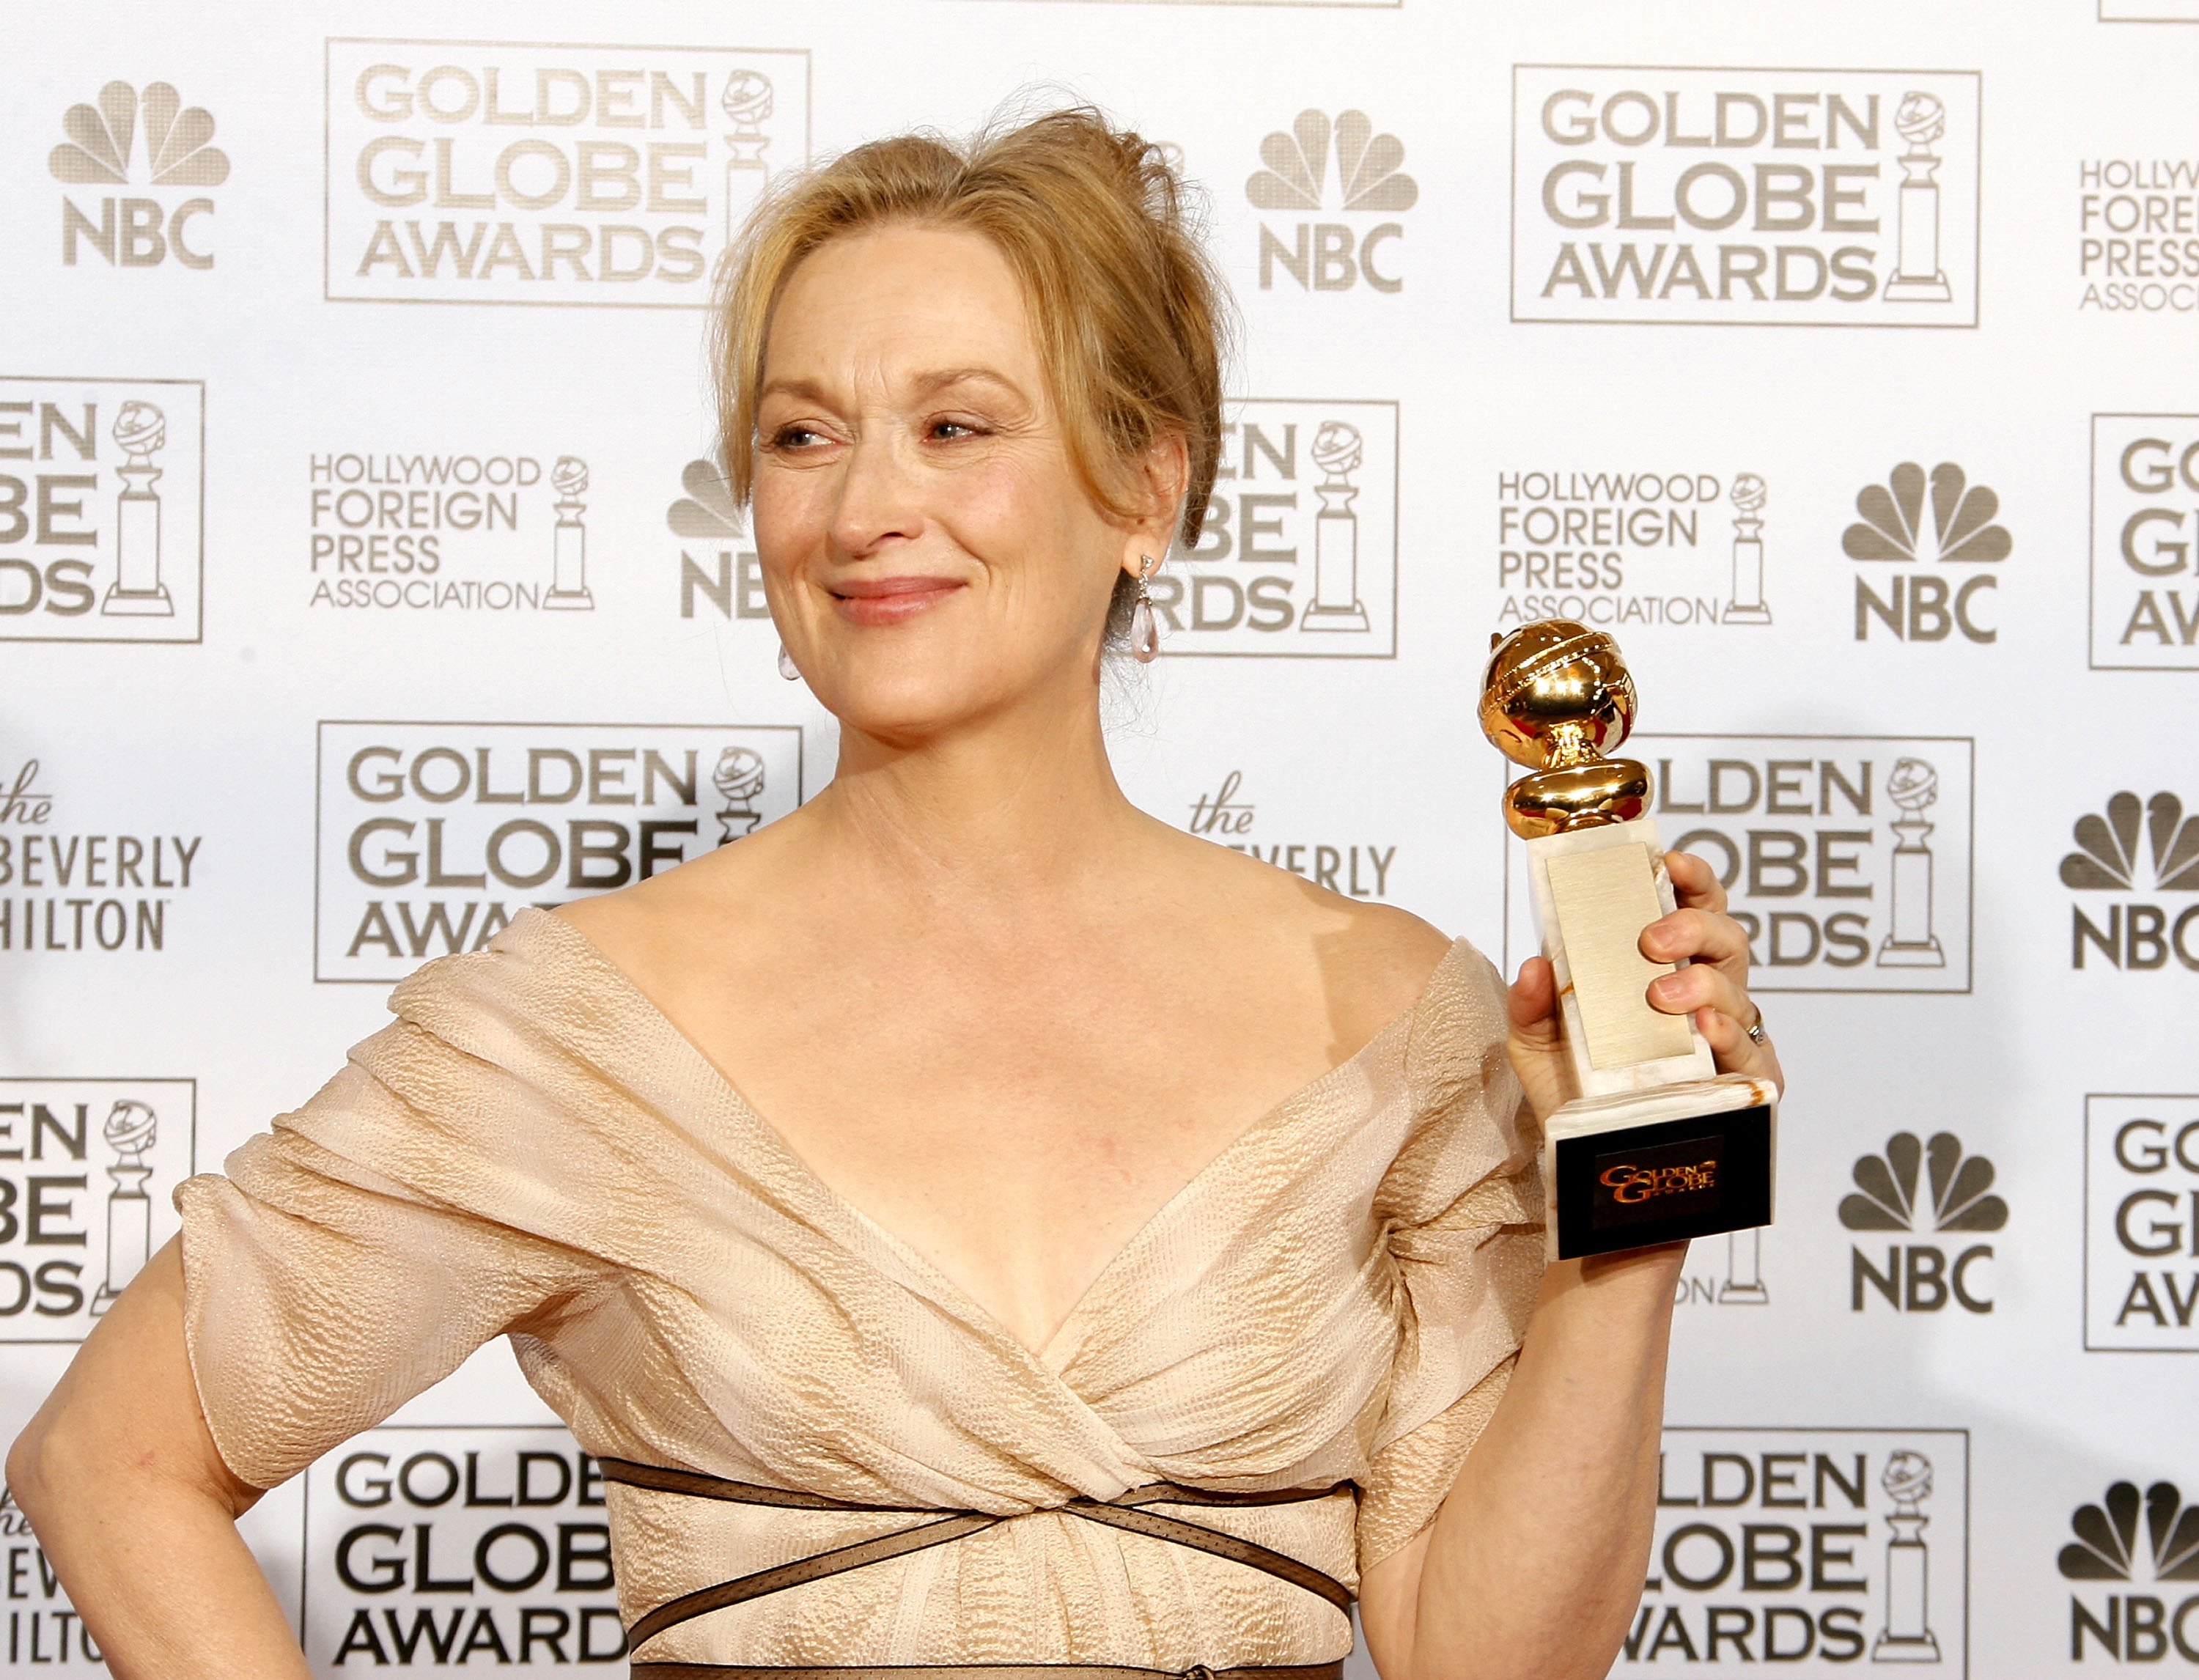 Meryl Streep holding a golden trophy for her role in 'The Devil Wears Prada'